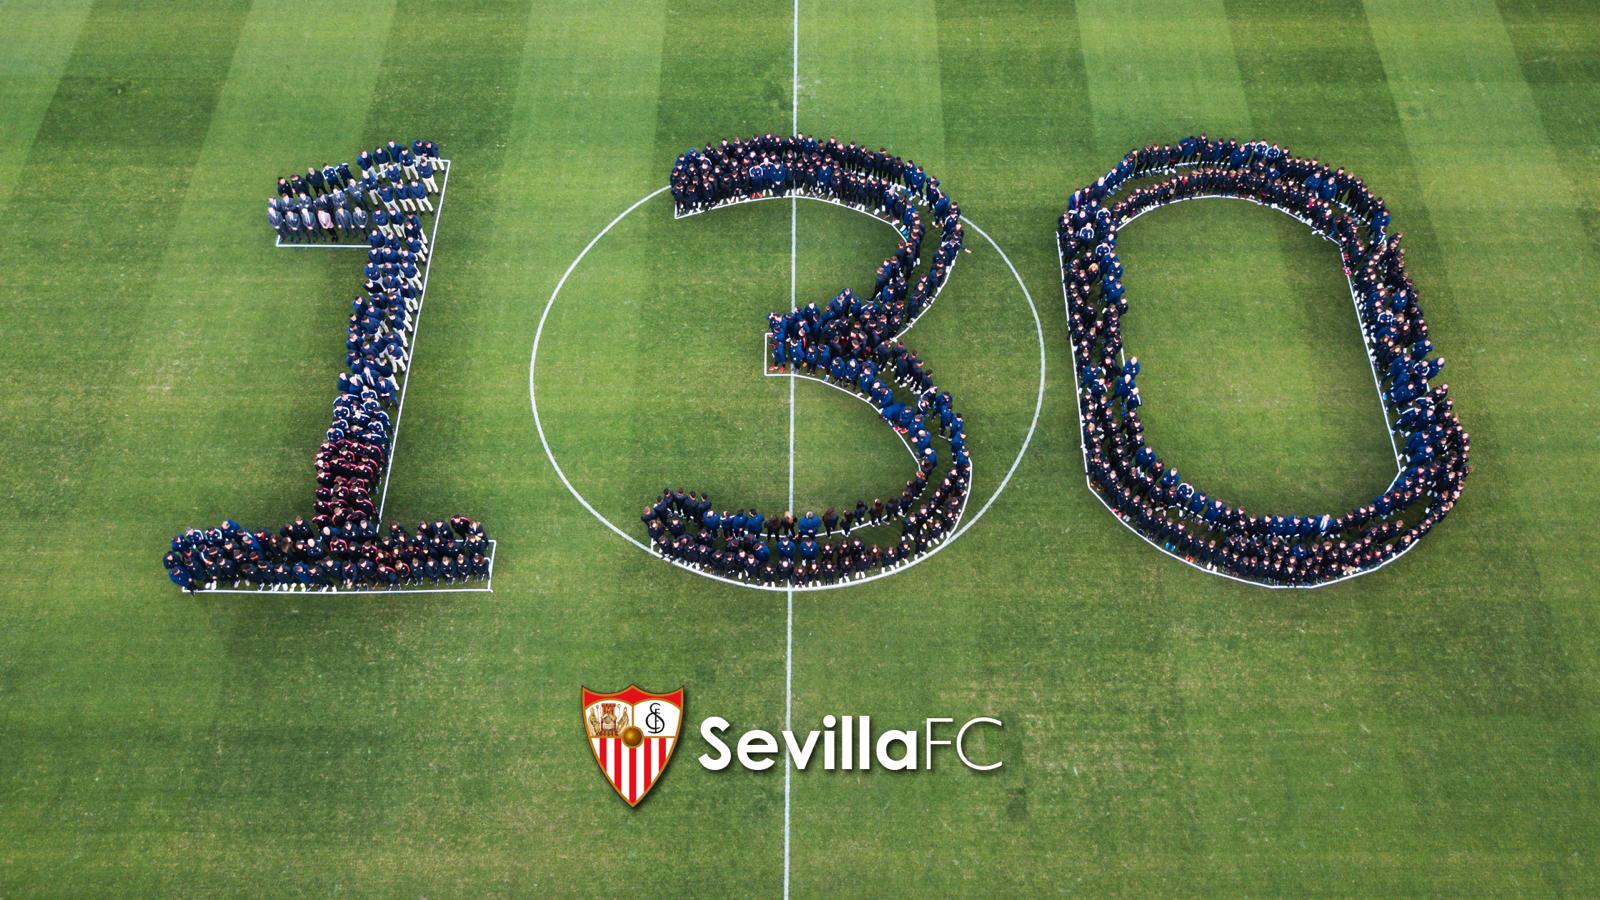 Every Sevilla FC team make the '130' on the pitch 